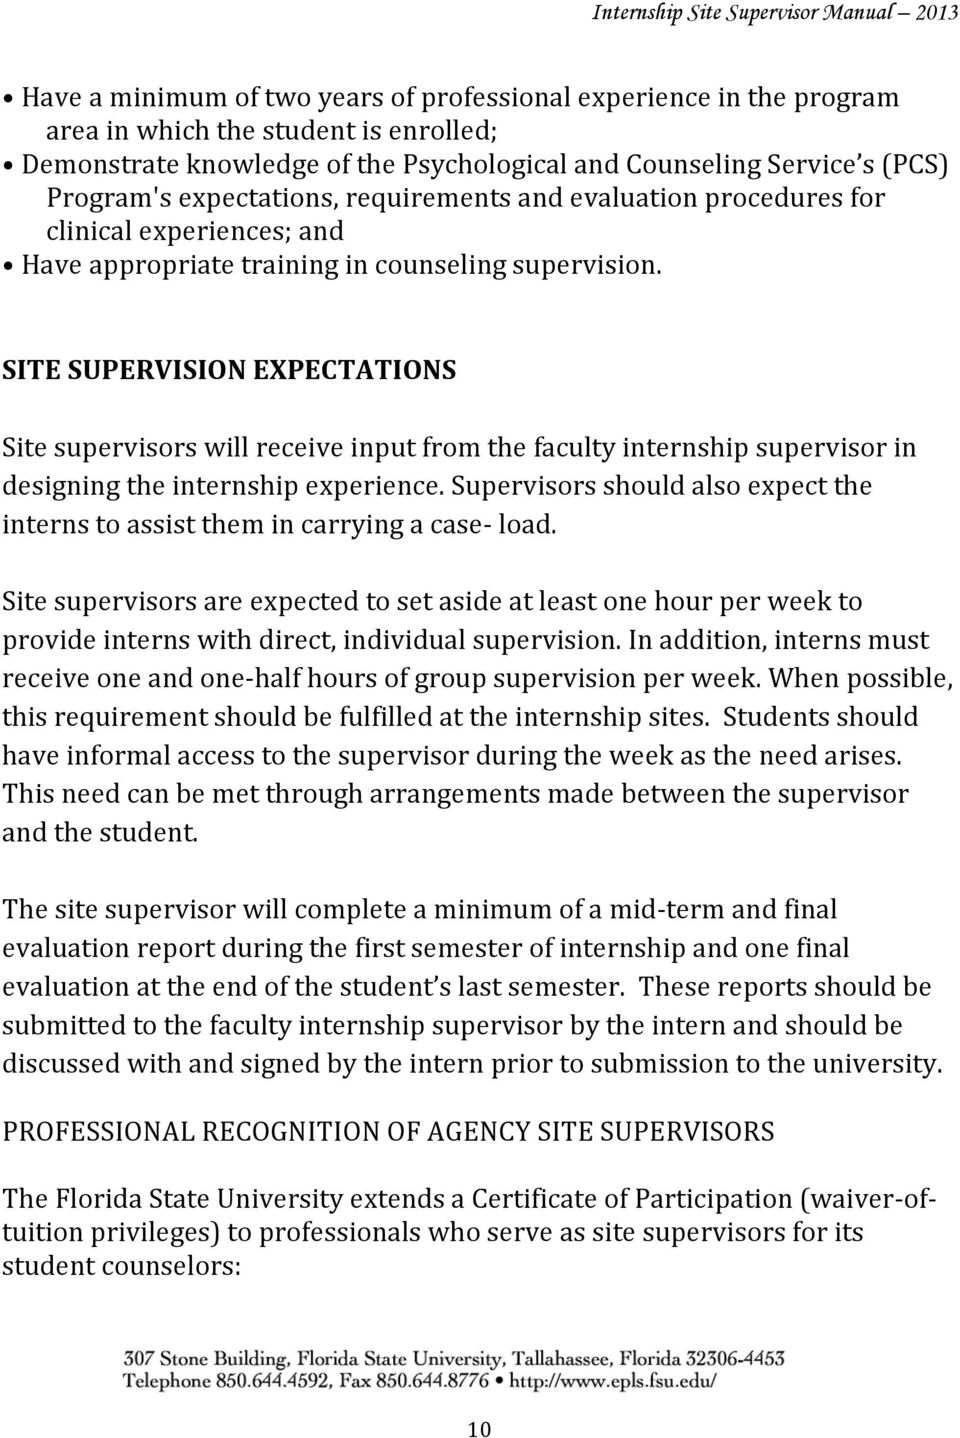 SITE SUPERVISION EXPECTATIONS Site supervisors will receive input from the faculty internship supervisor in designing the internship experience.